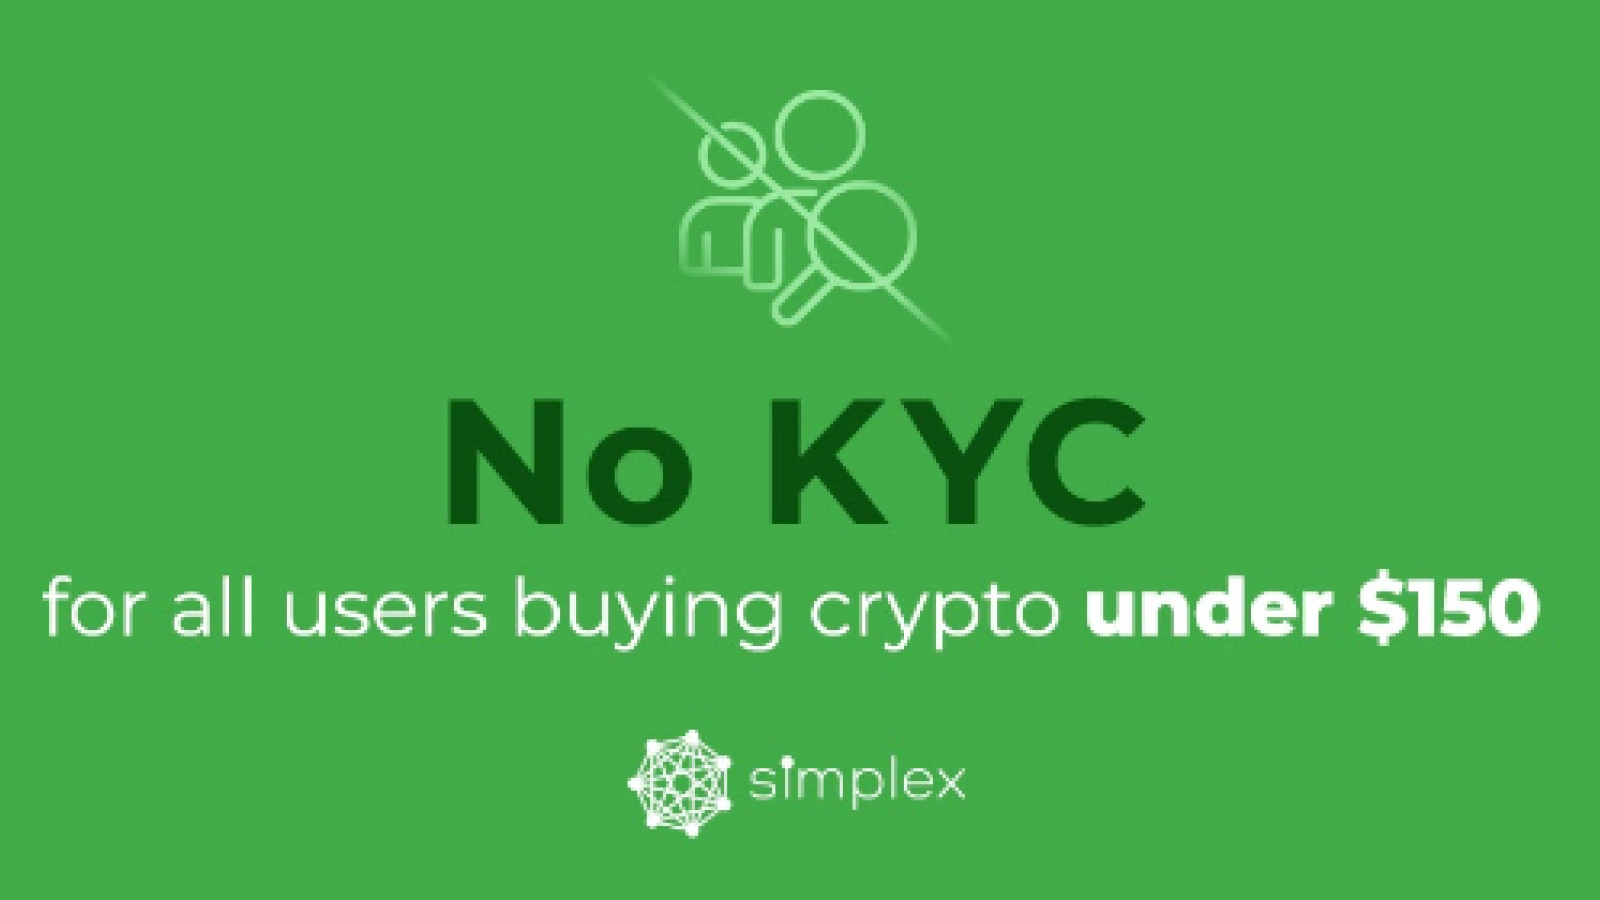 Transactions below $150 with no KYC